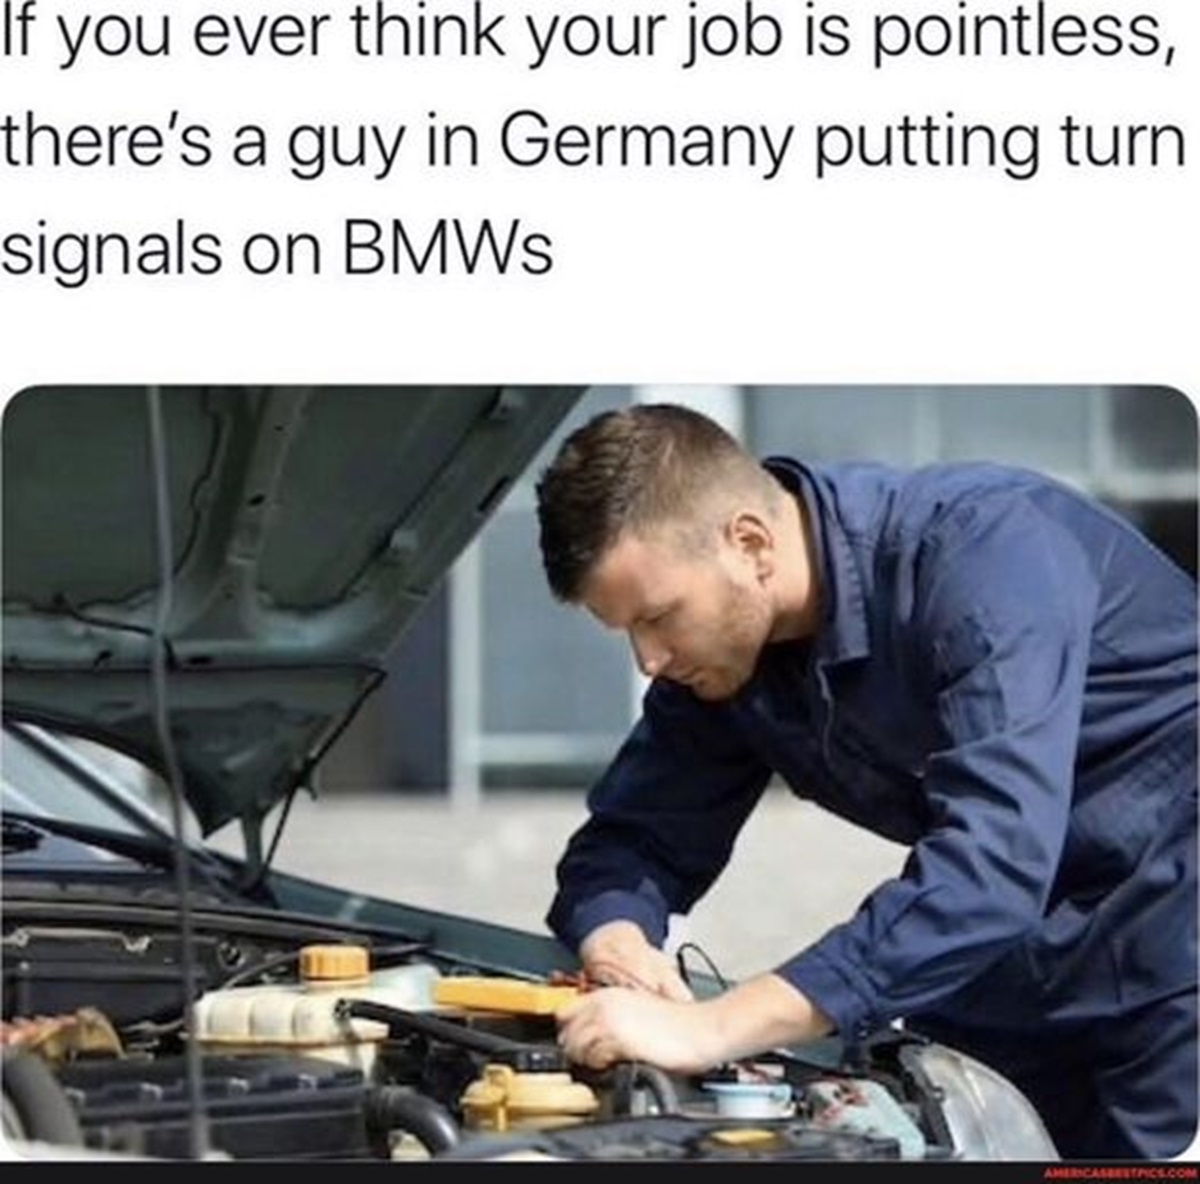 car mechanic stock - If you ever think your job is pointless, there's a guy in Germany putting turn signals on BMWs Americasbestpics.Com